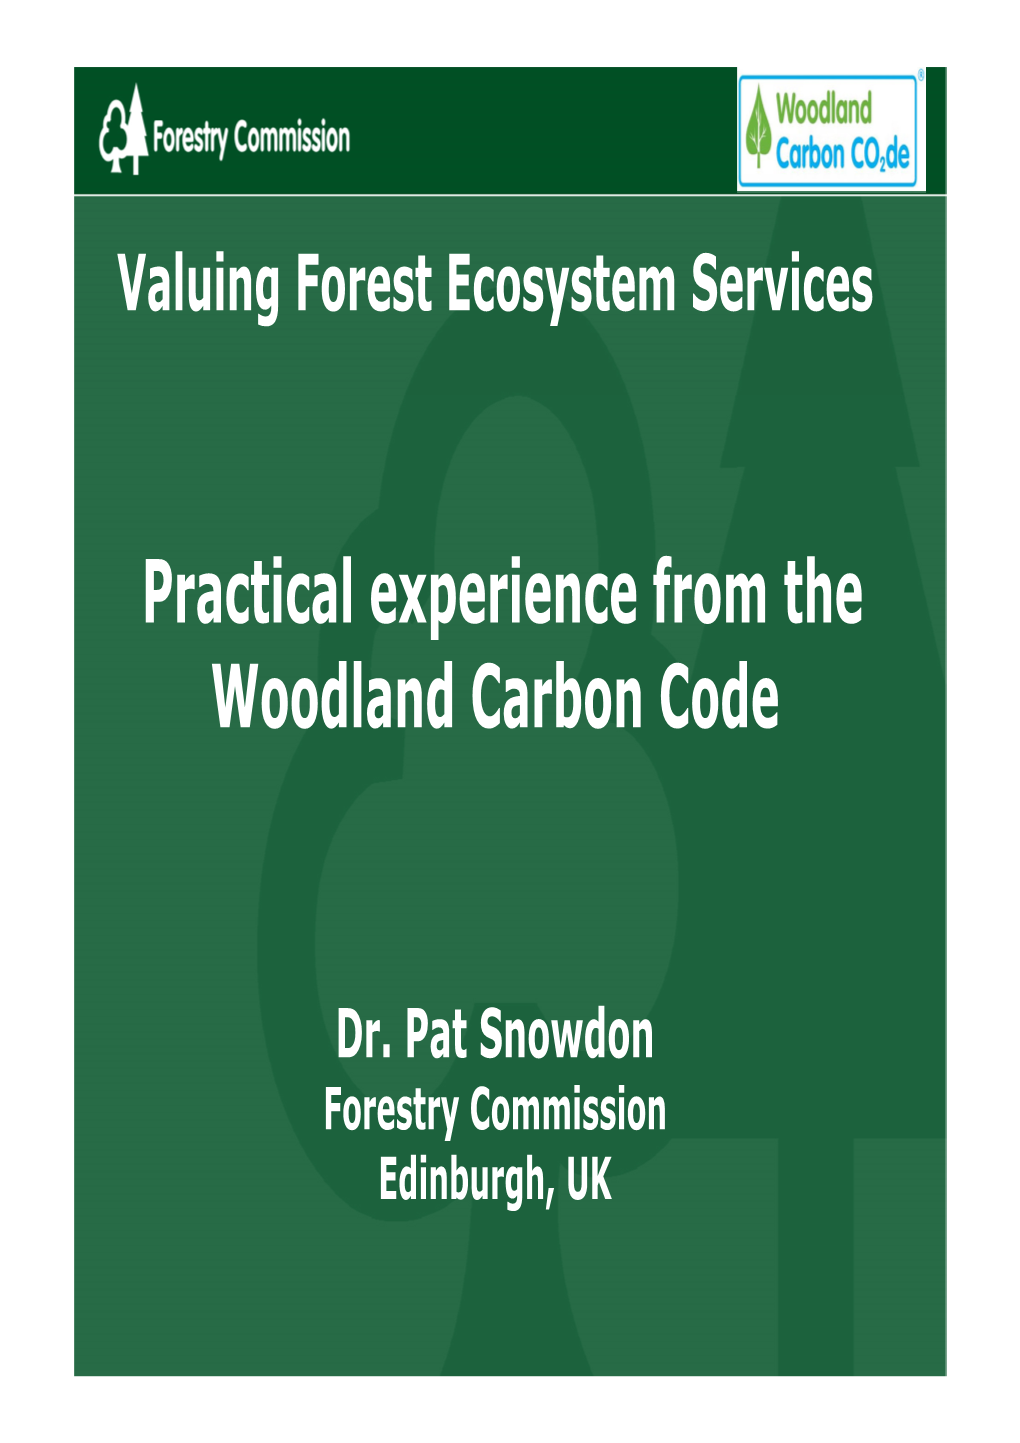 Practical Experience from the Woodland Carbon Code